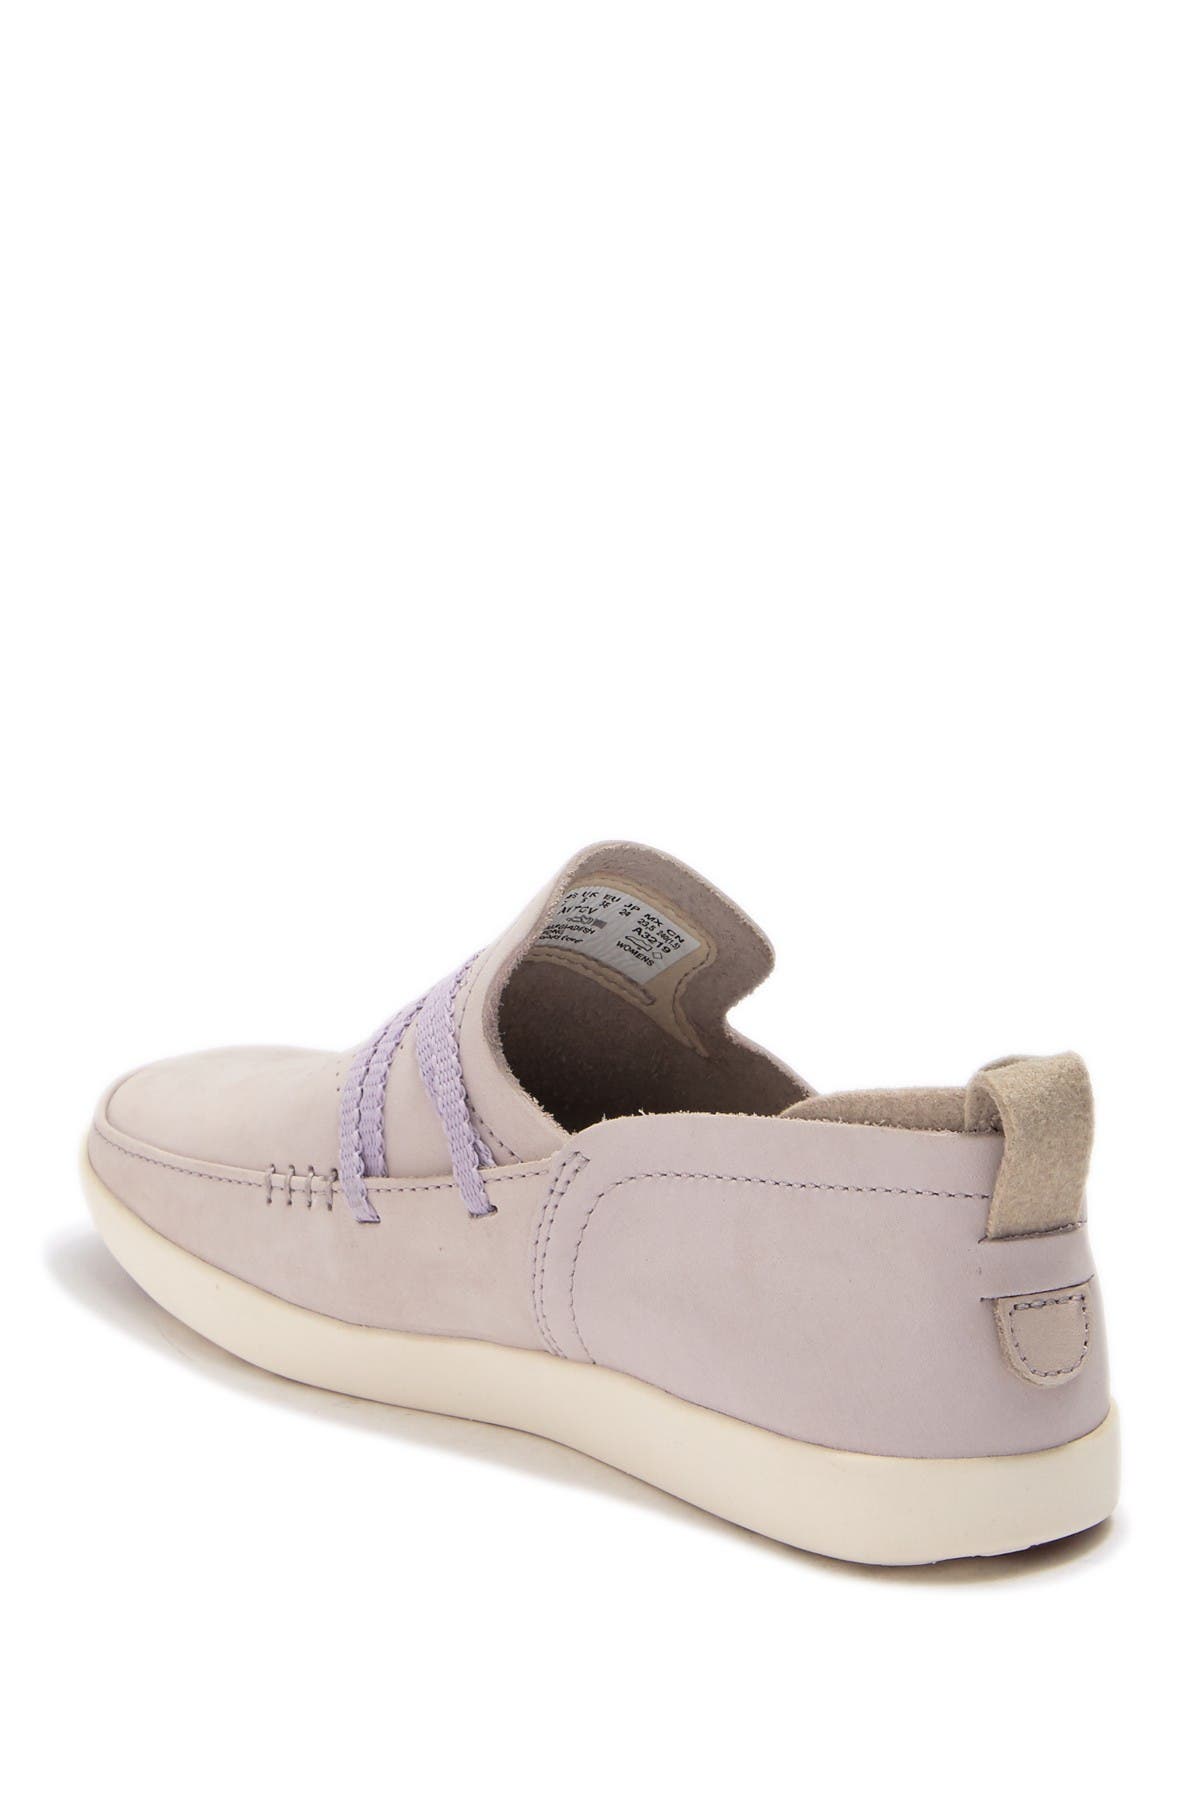 Timberland | Project Better Leather Micro Perforated Slip-On Sneaker |  Nordstrom Rack